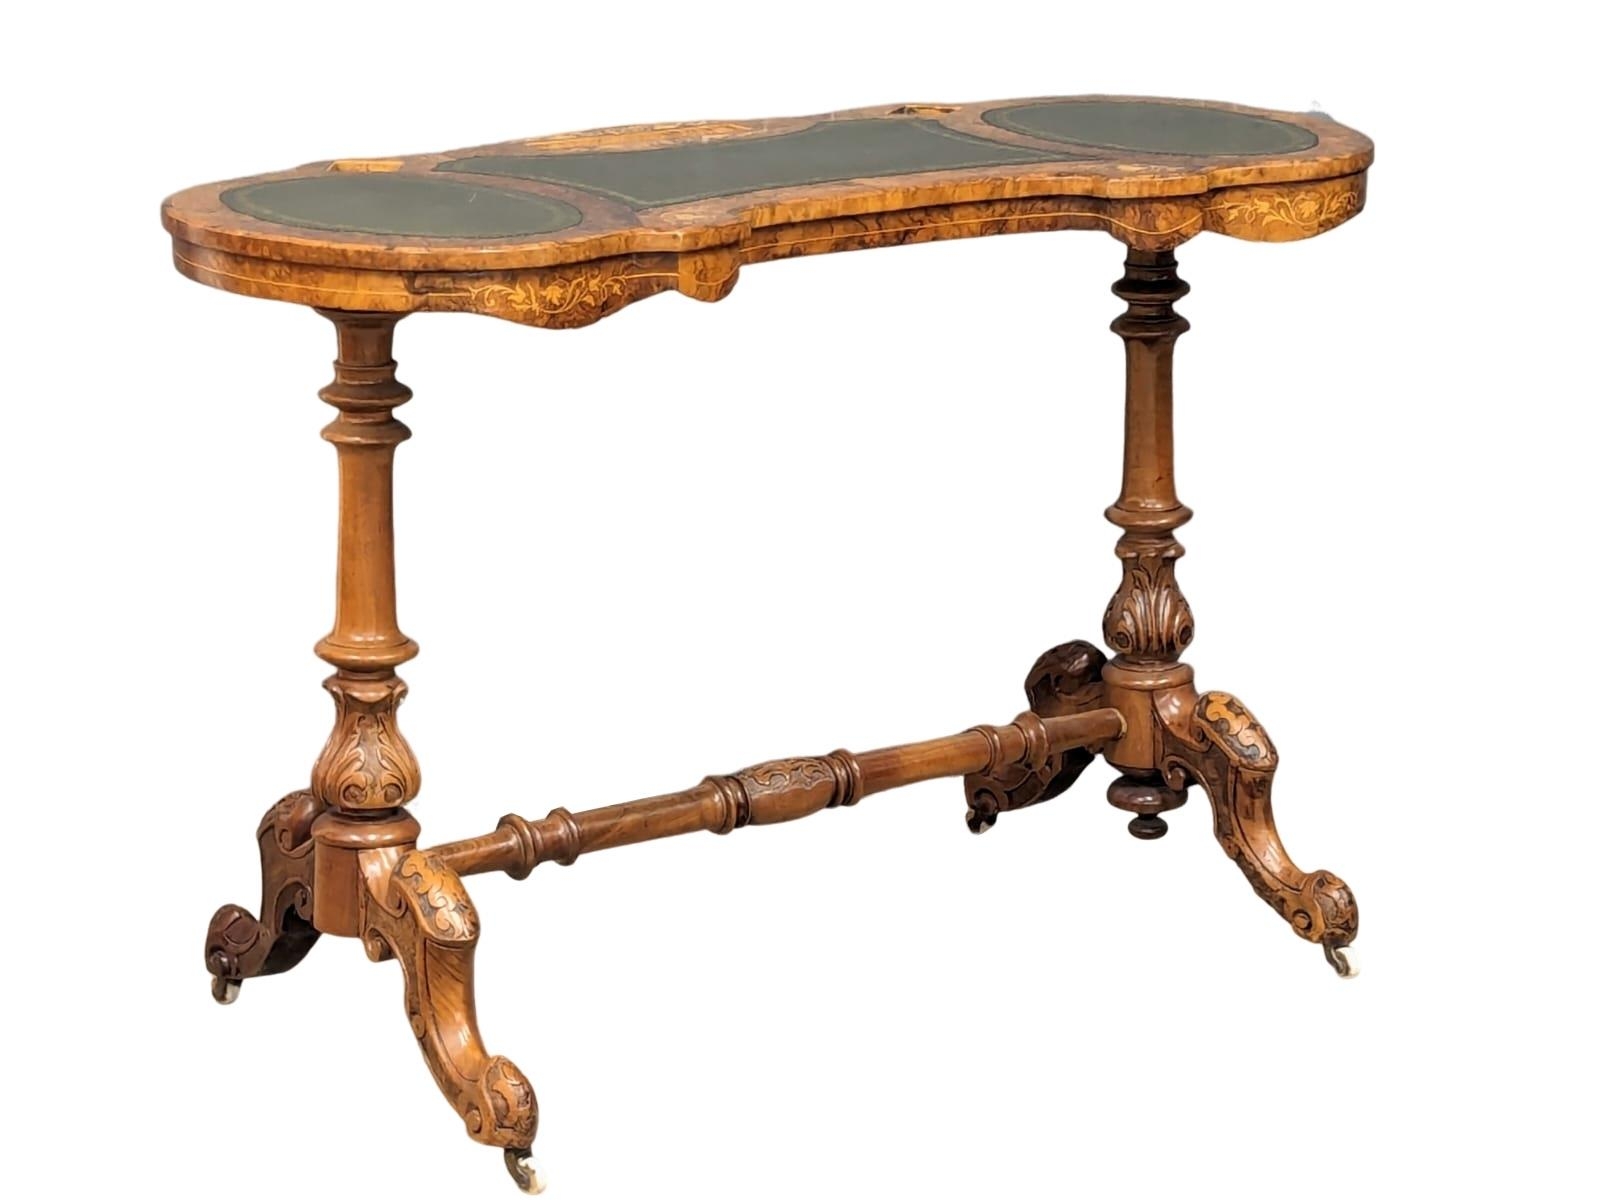 A Mid Victorian Burr Walnut writing table with a tooled leather top. Circa 1860s. 105x48x71cm